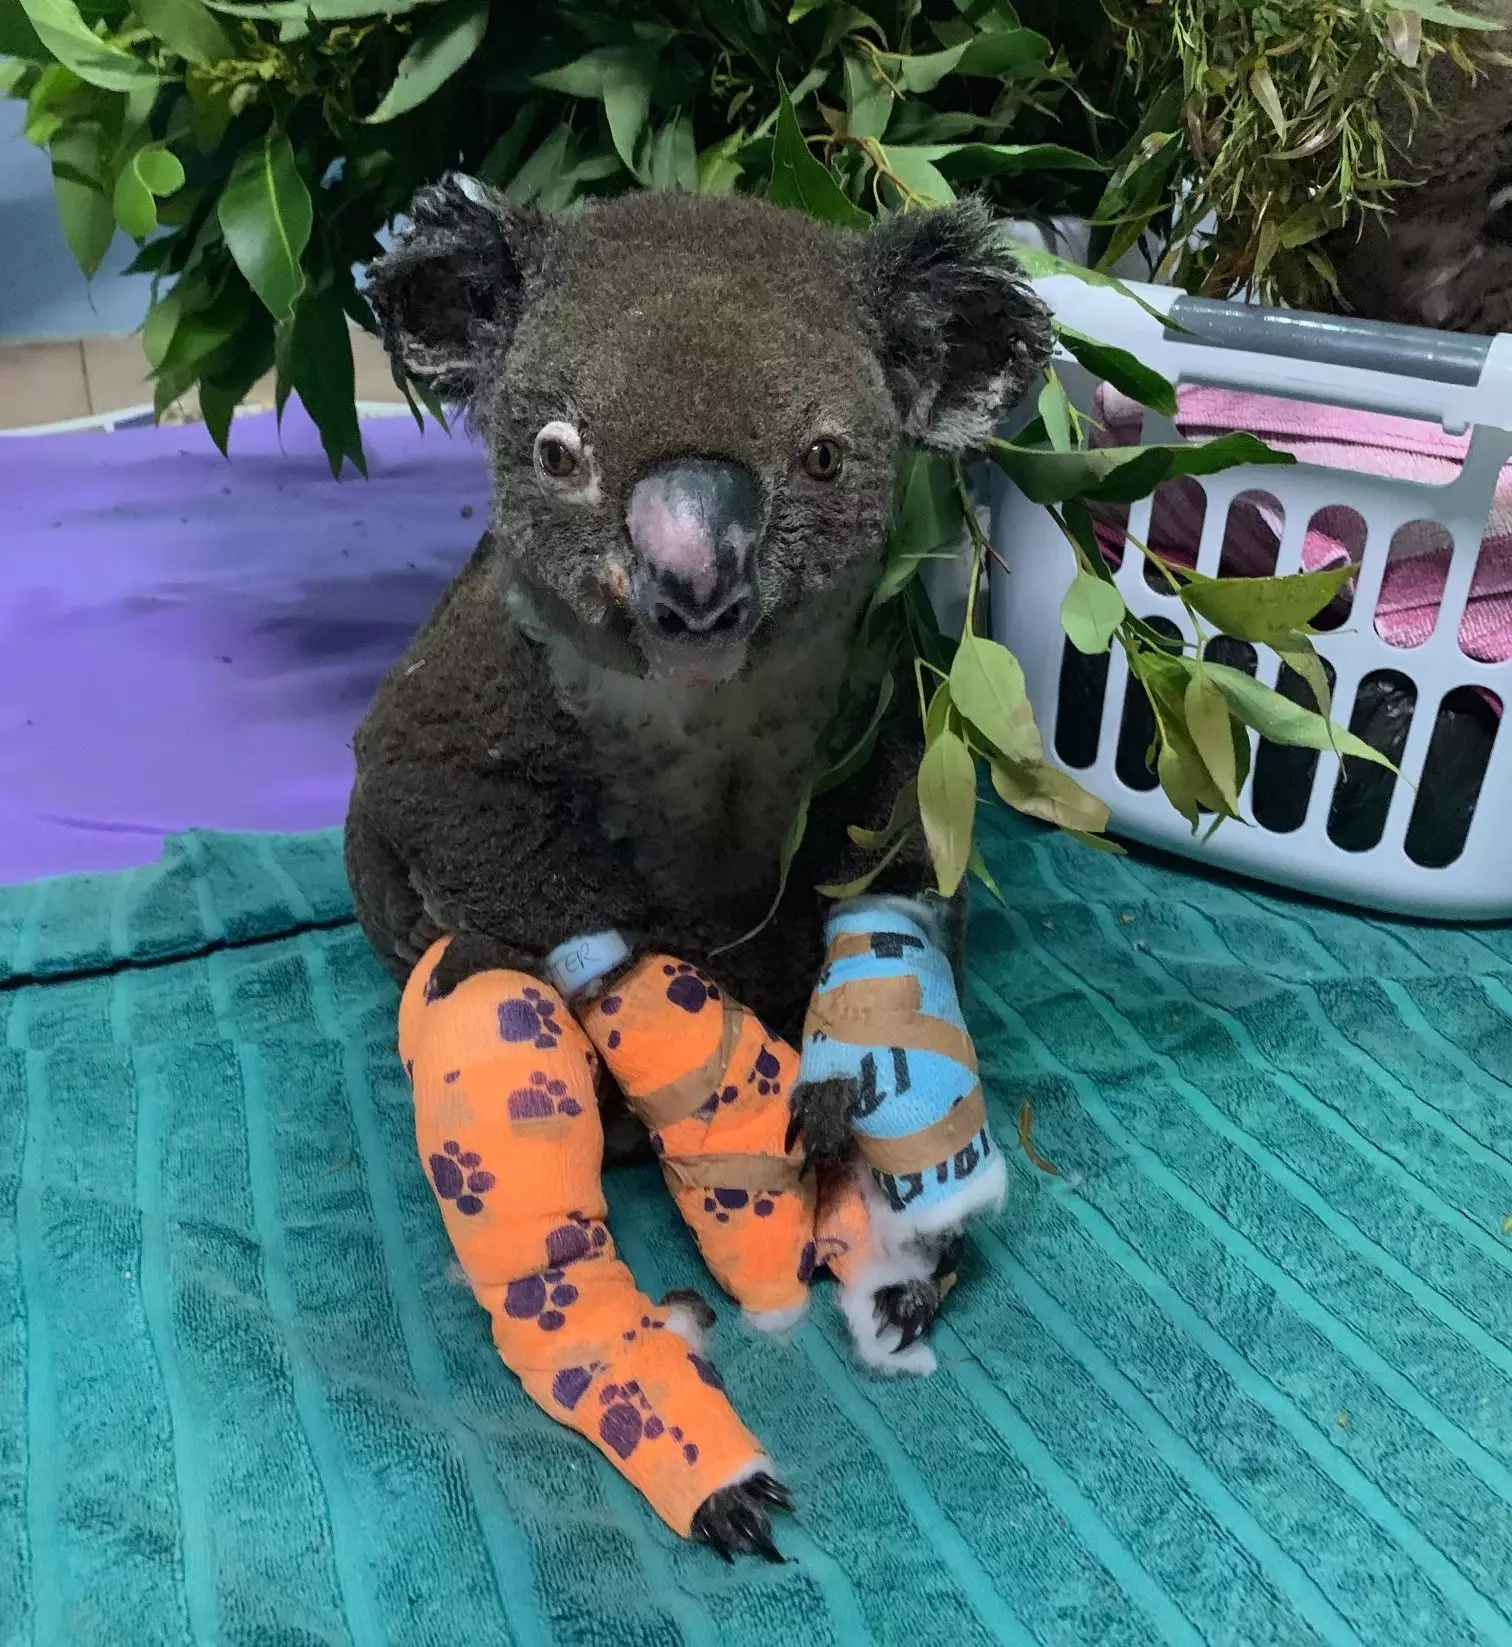 Peter the koala who has been badly burned in the bushfires is now being treated in a koala hospital (